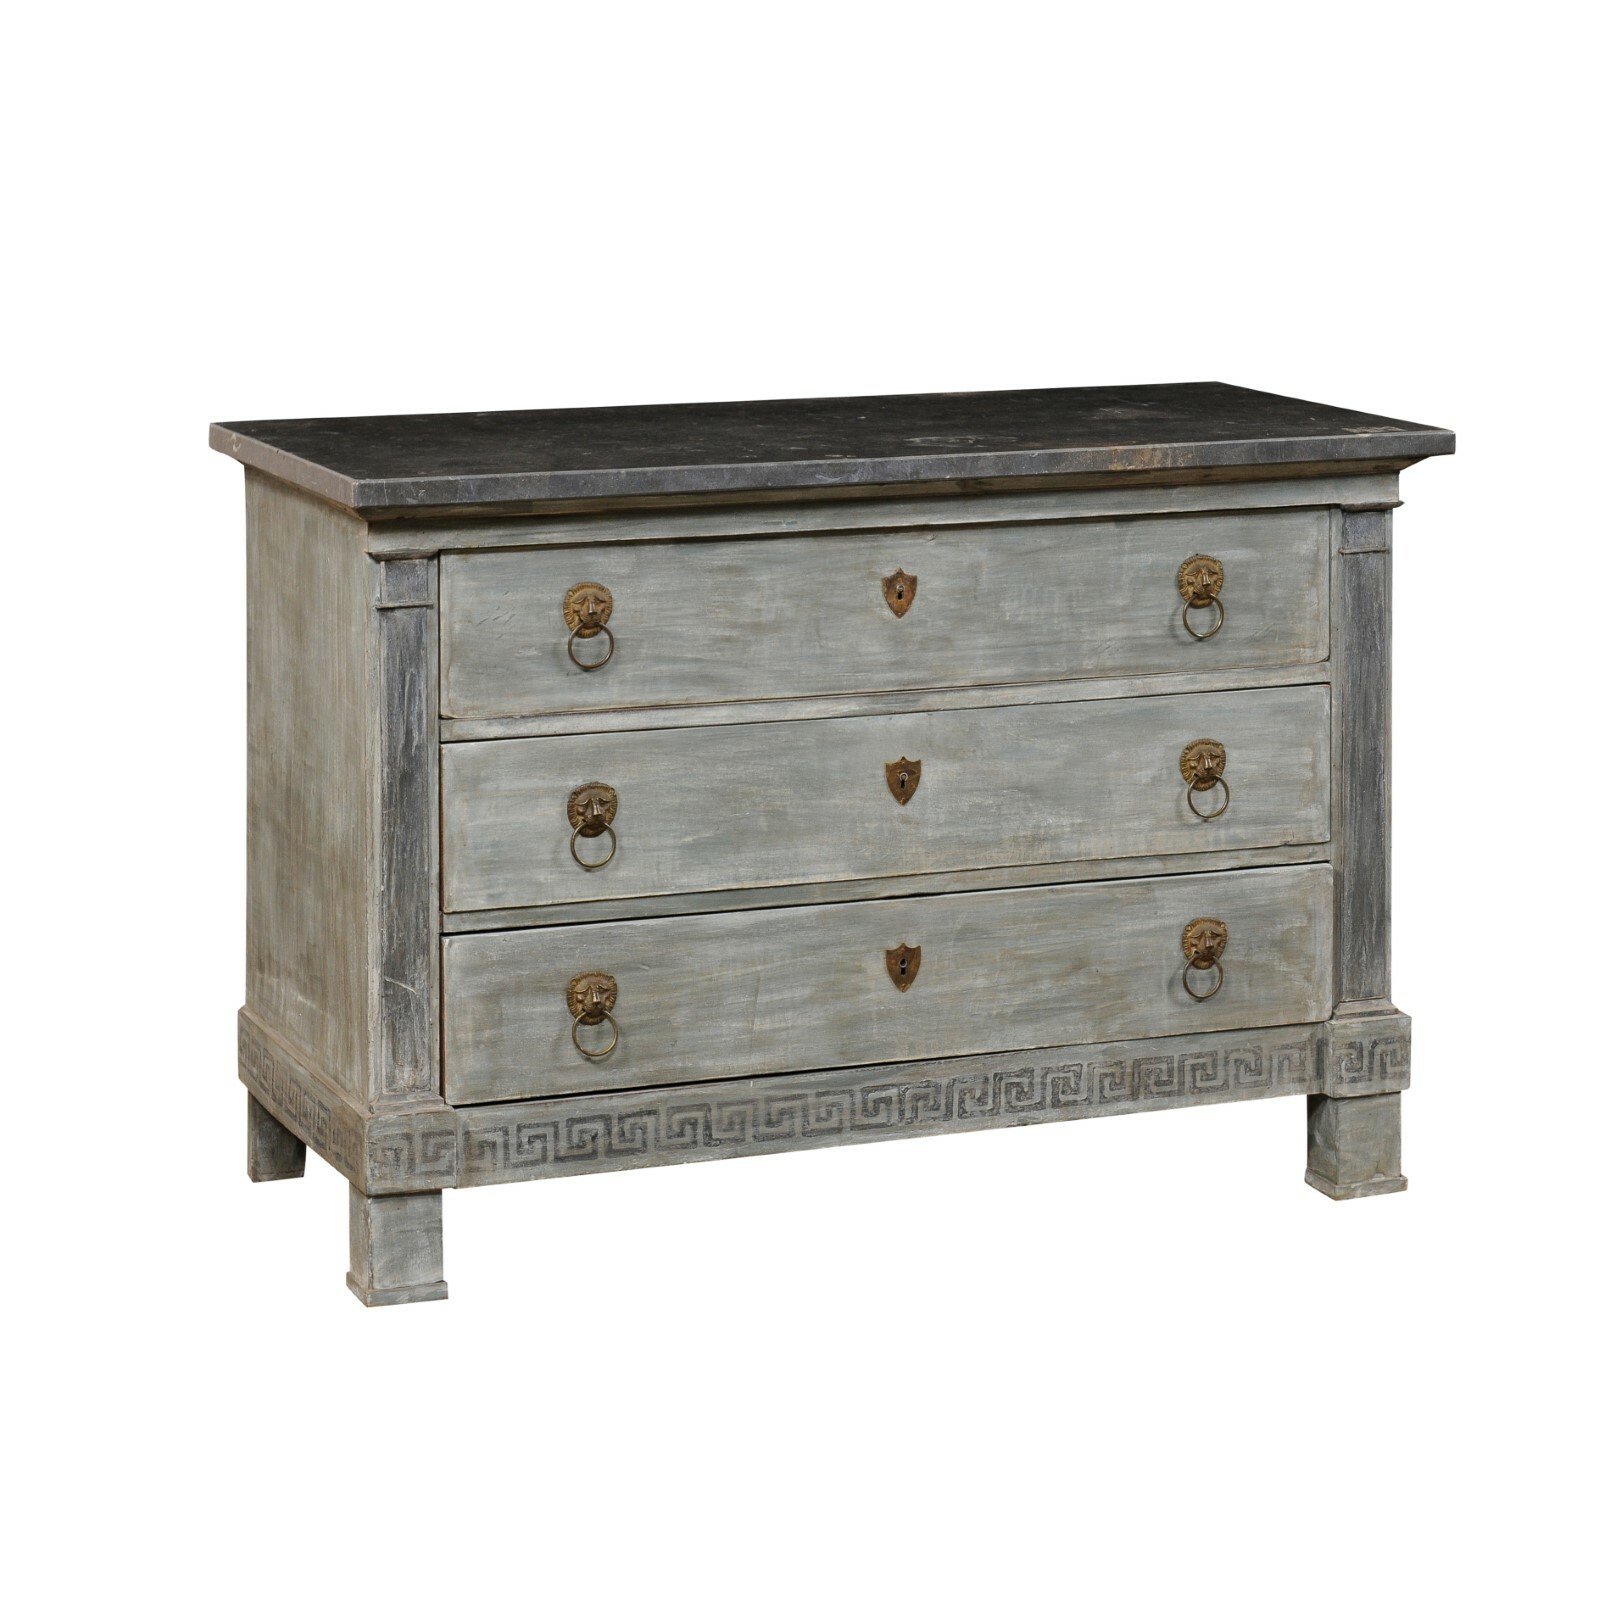 French Period Neoclassical Empire Commode